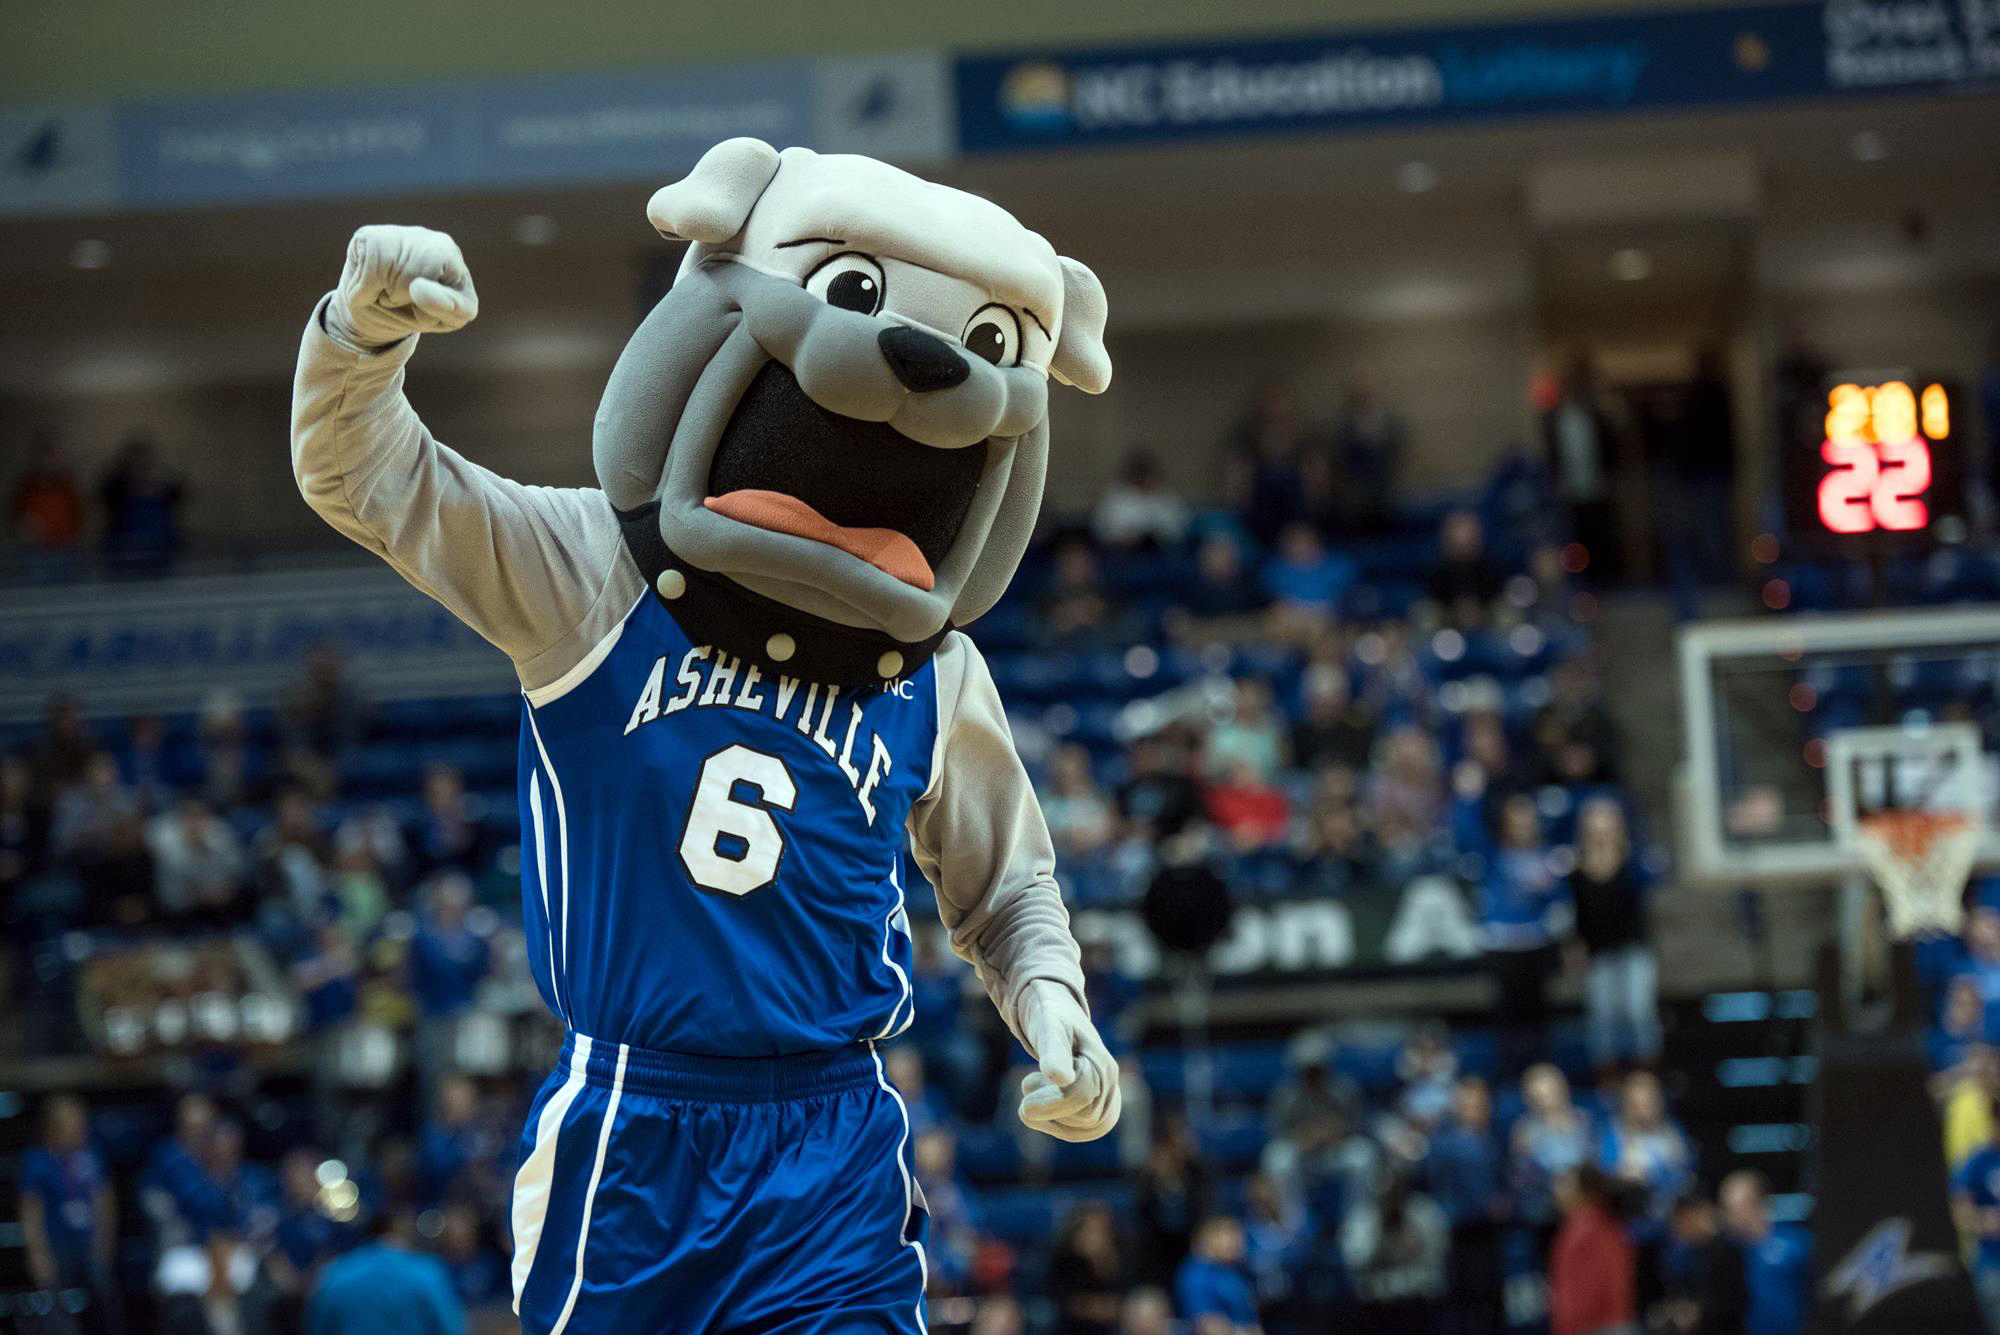 Rocky mascot at a basketball game (placeholder image)